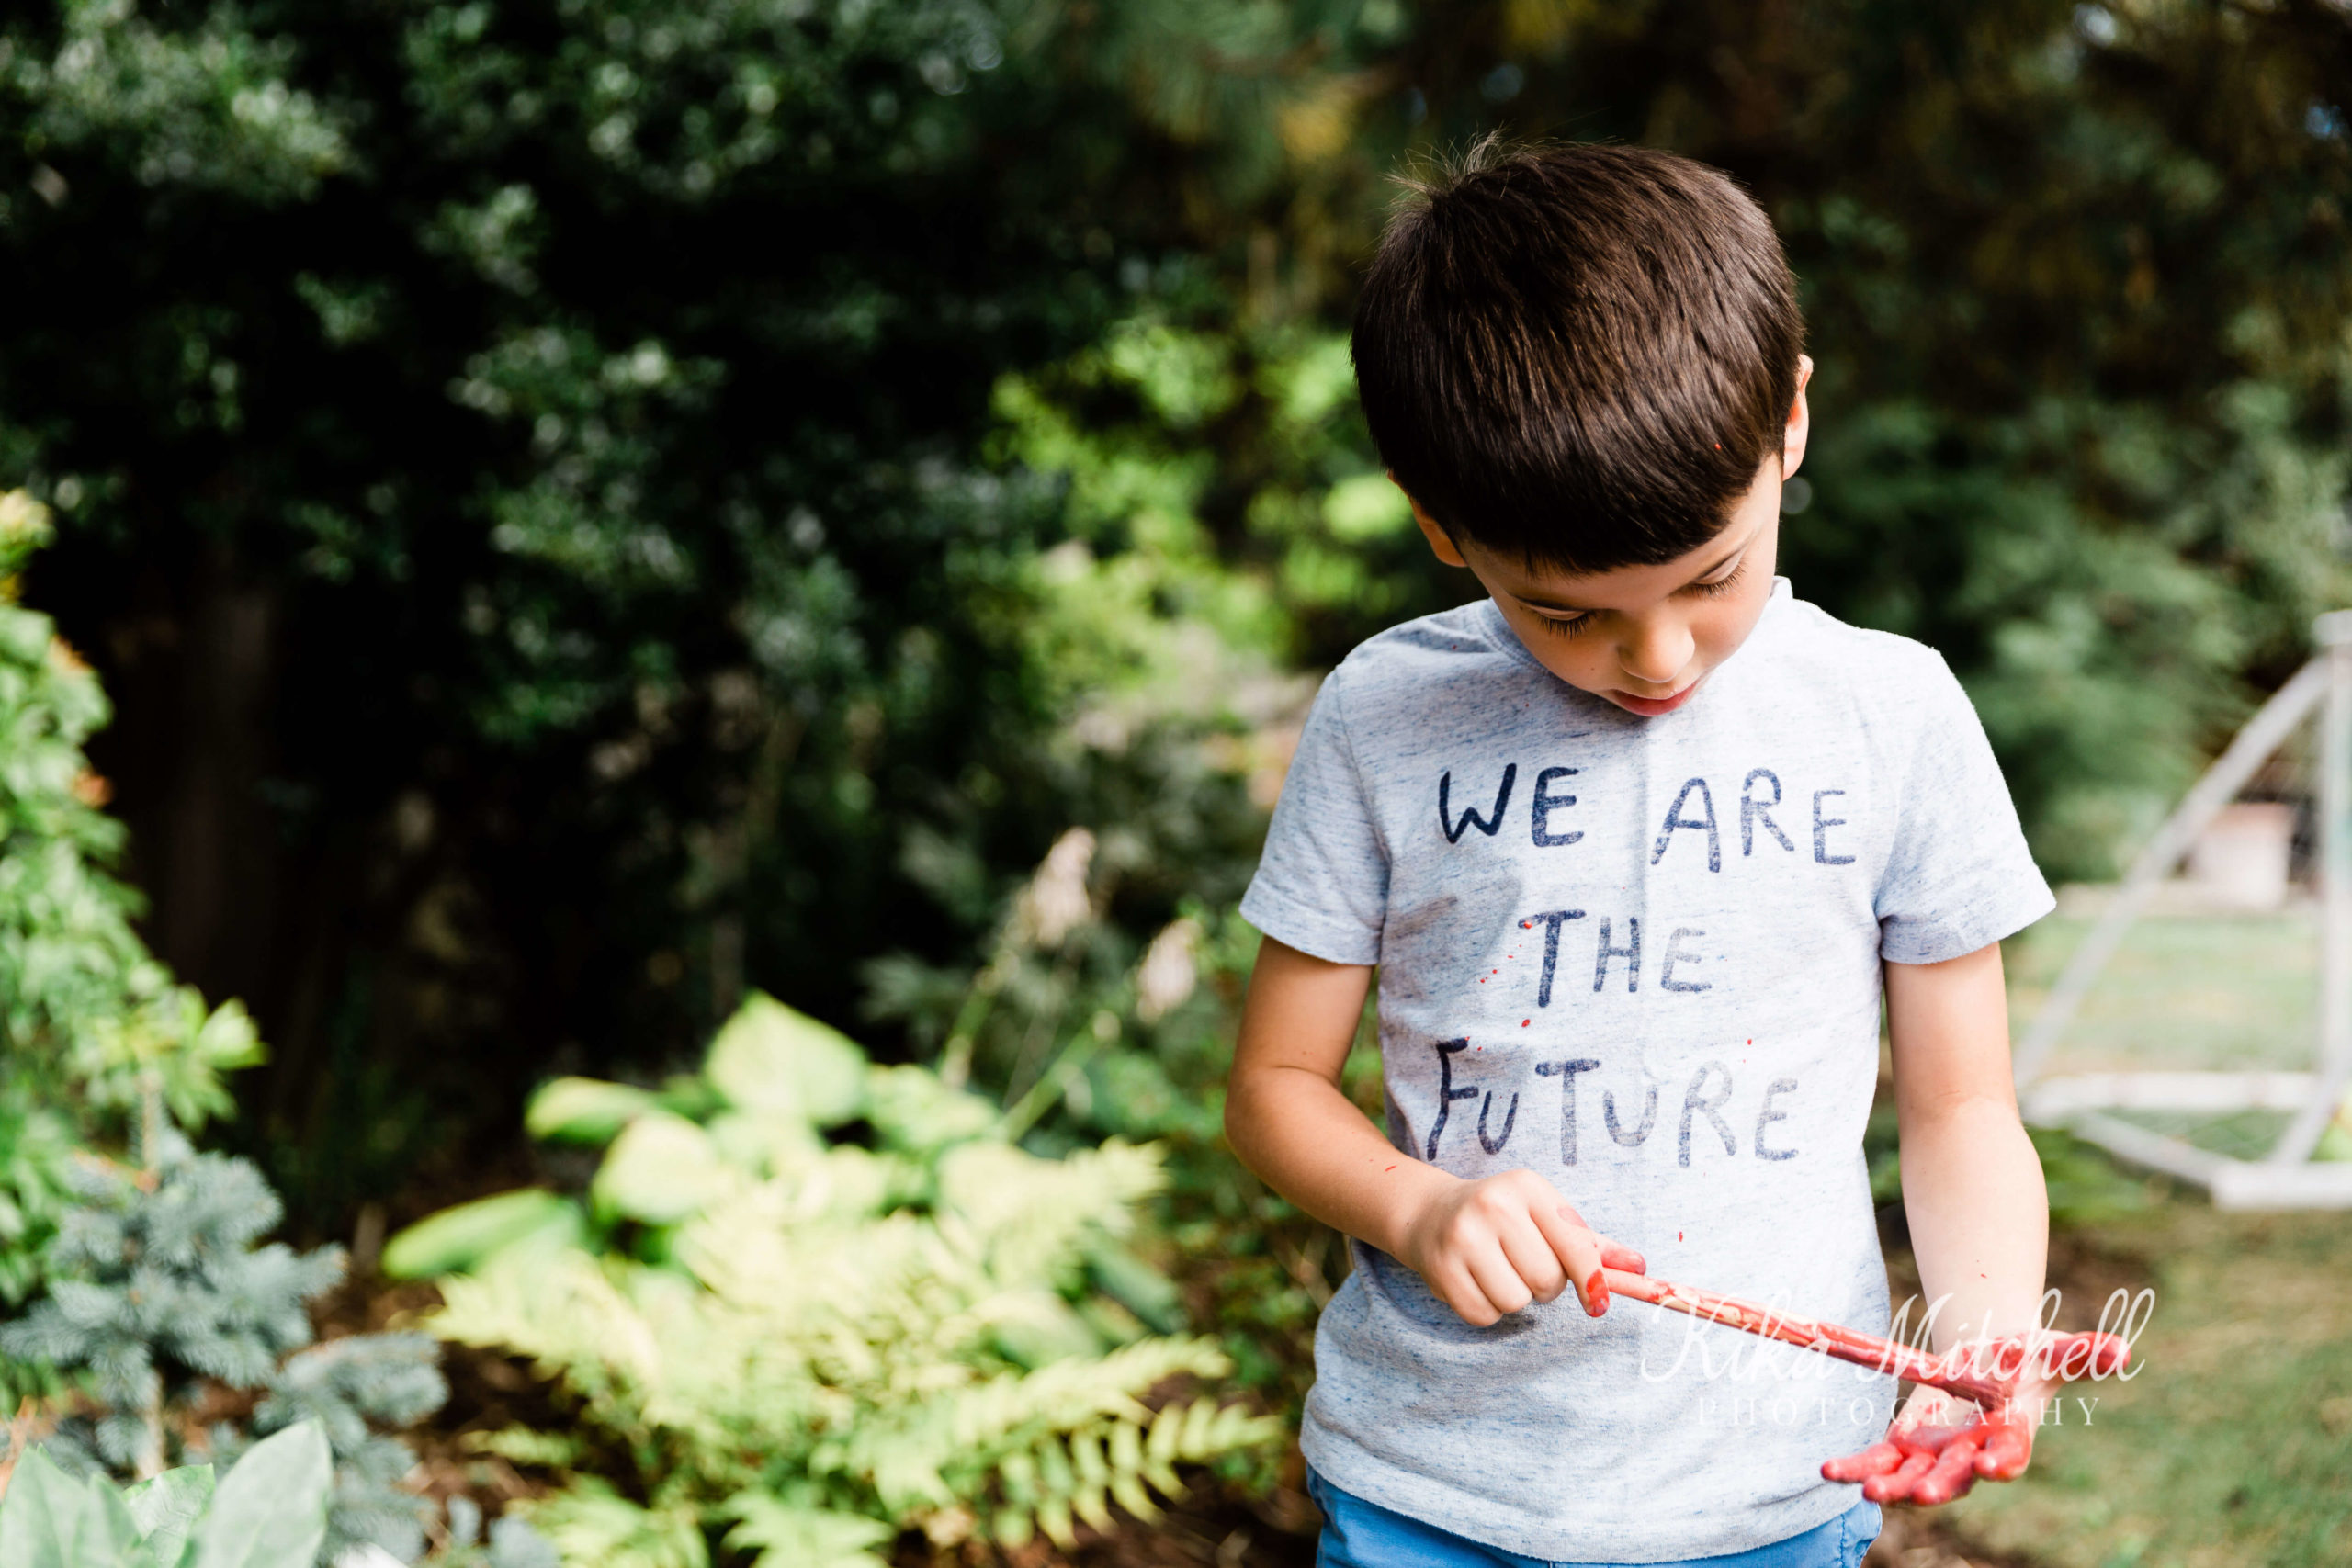 male child walking through woodland, holding a stick - t shirt reads 'we are the future'